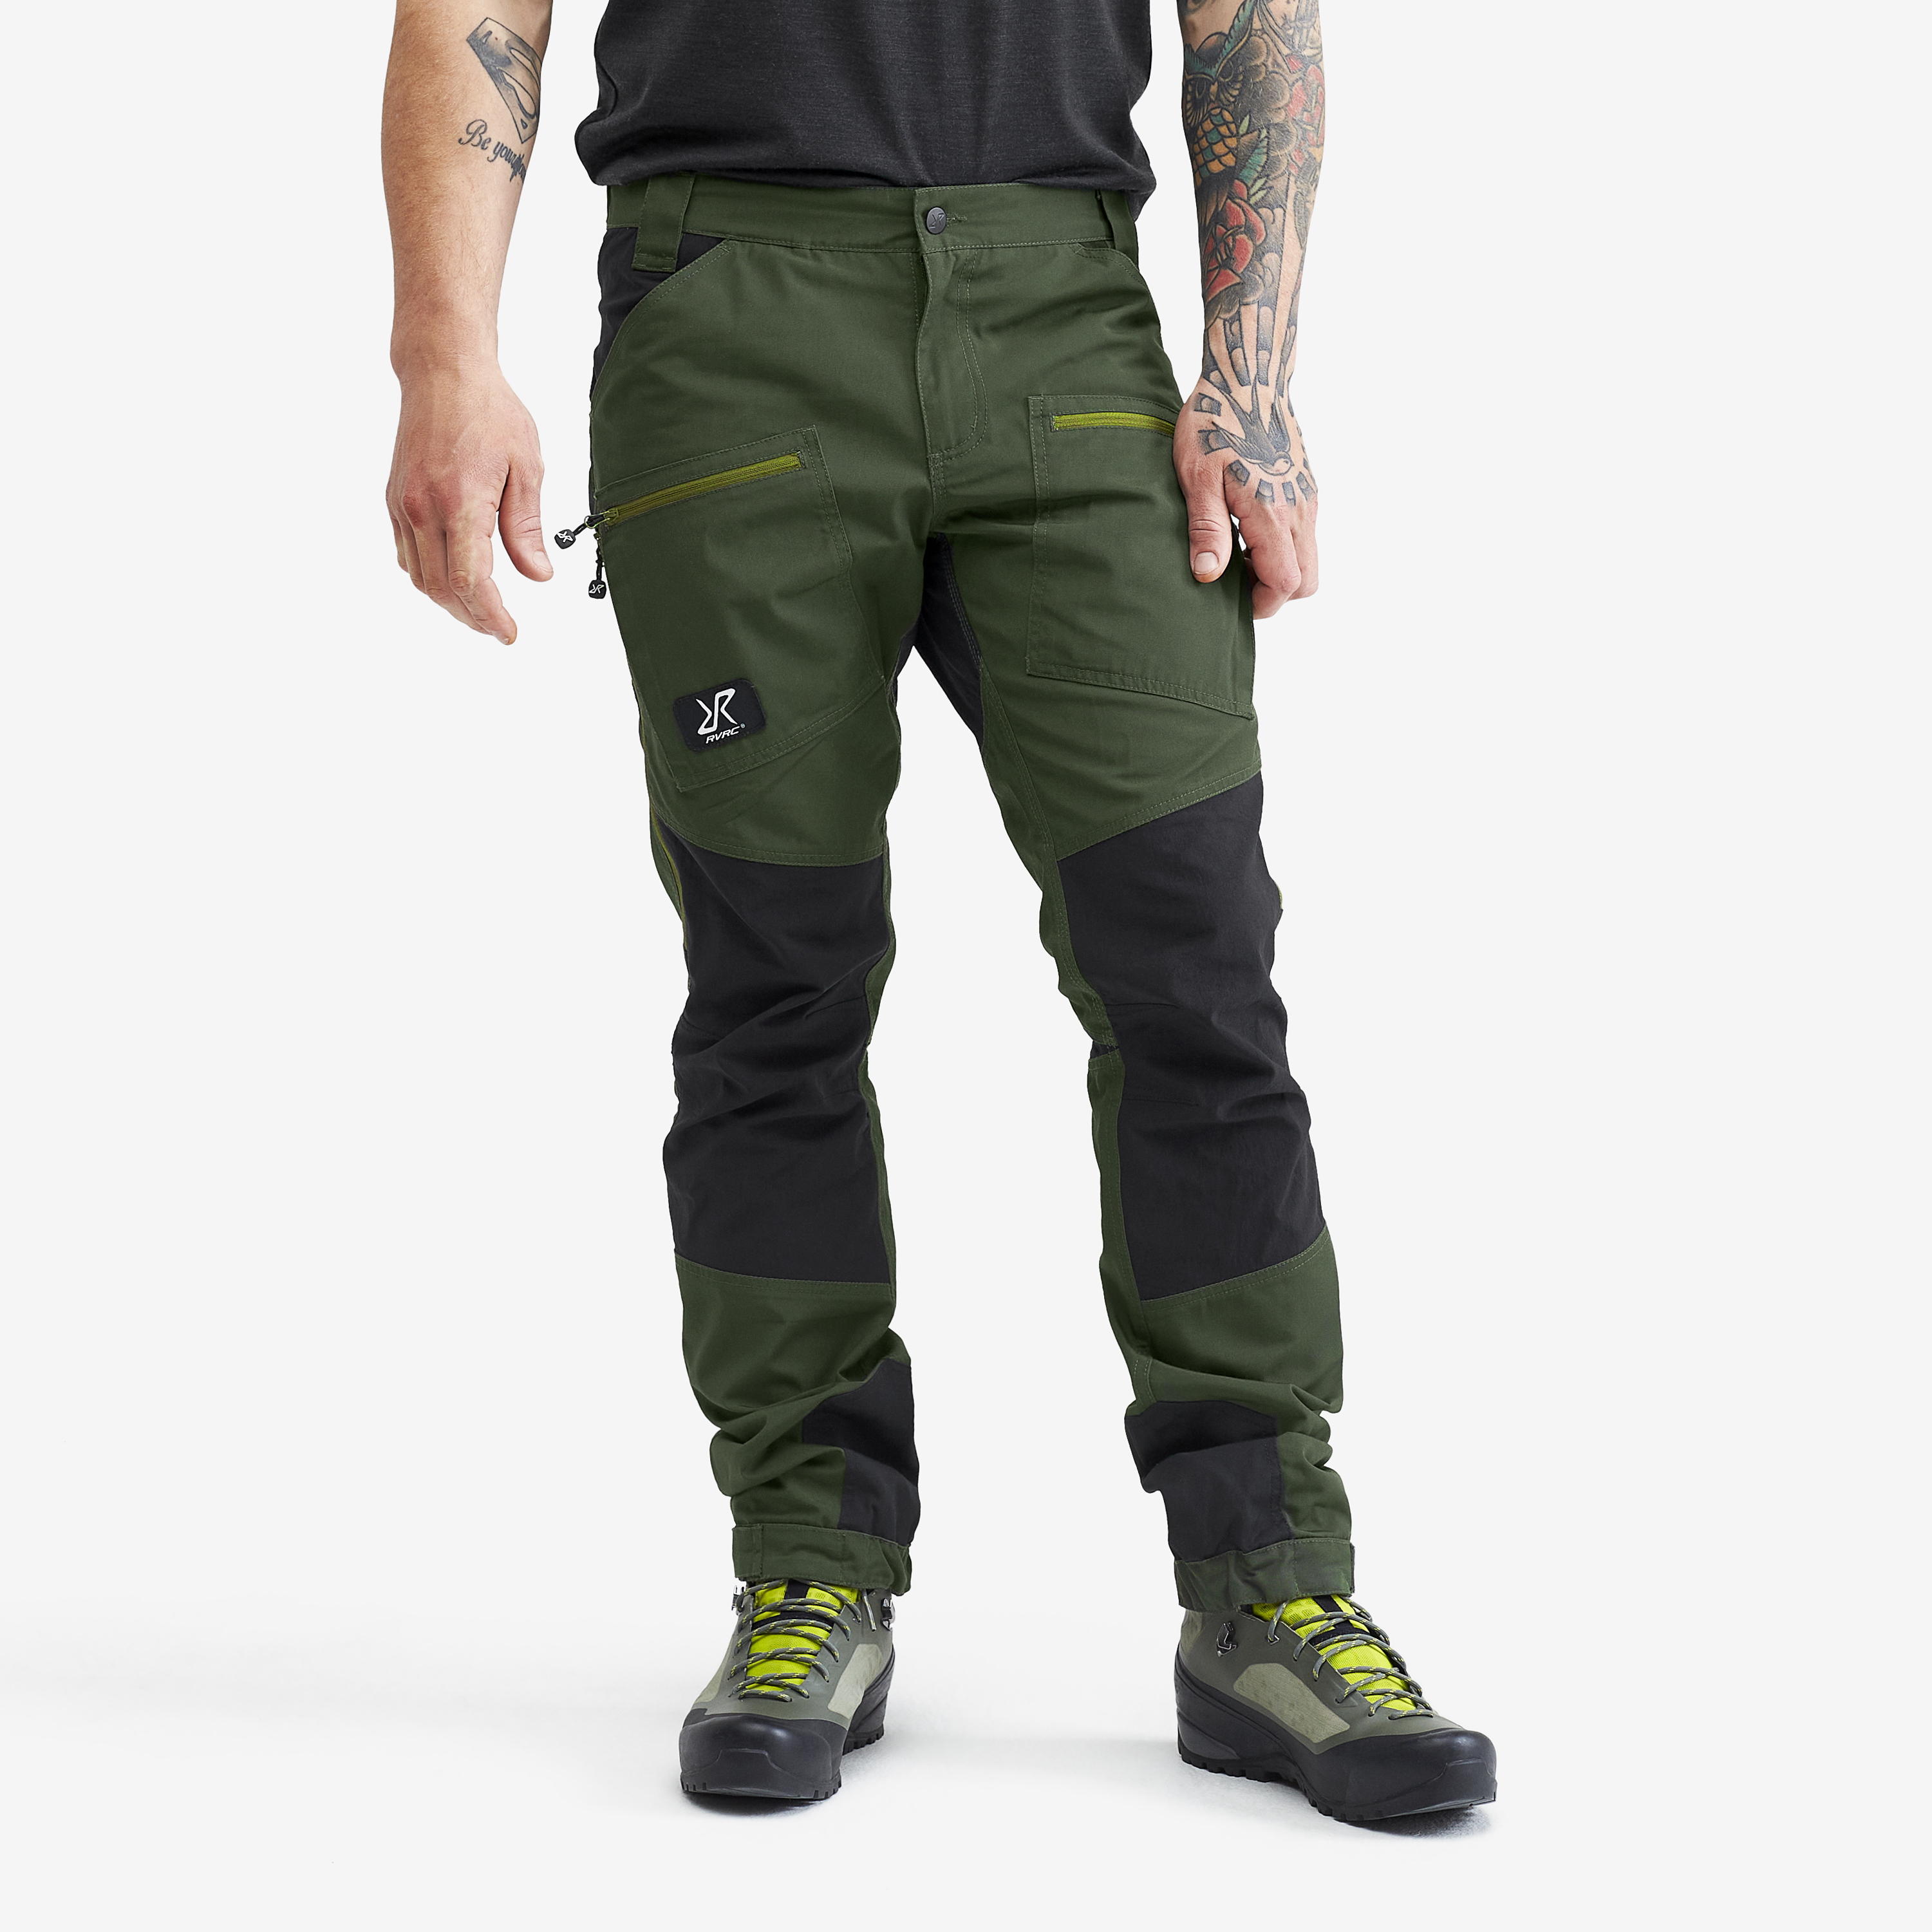 Nordwand Pro Pants Green/Black Hombres